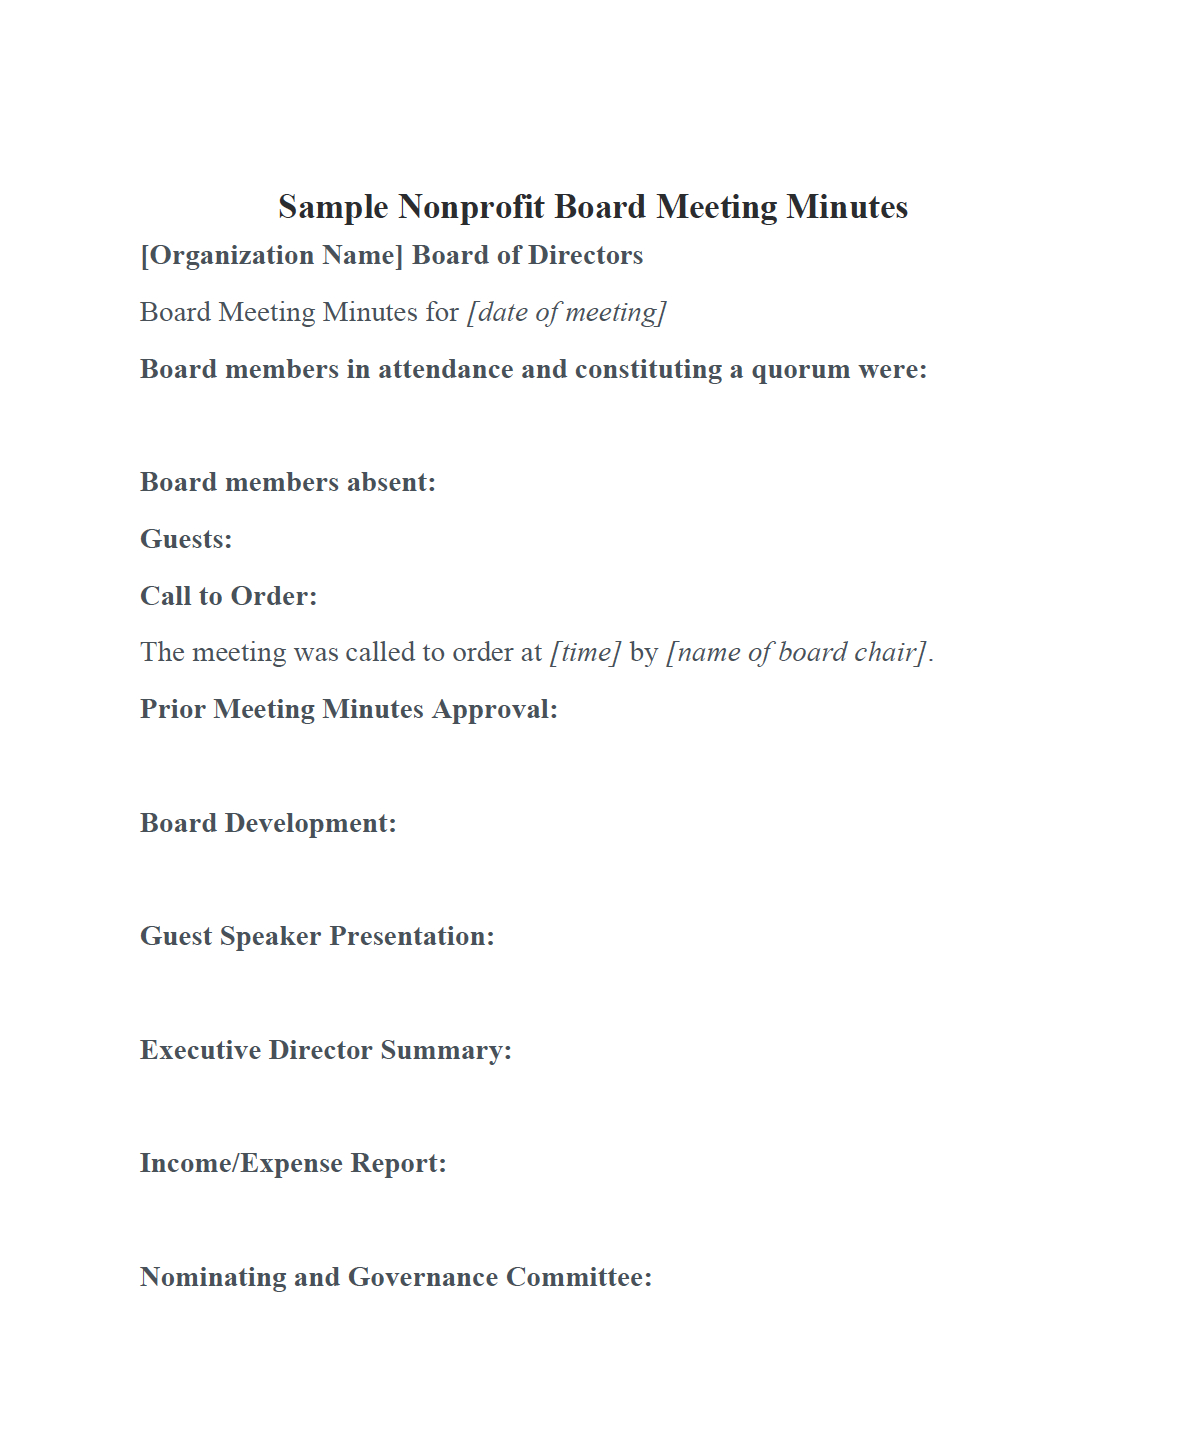 Nonprofit Board Meeting Minutes Template Diligent Insights intended for size 1184 X 1436